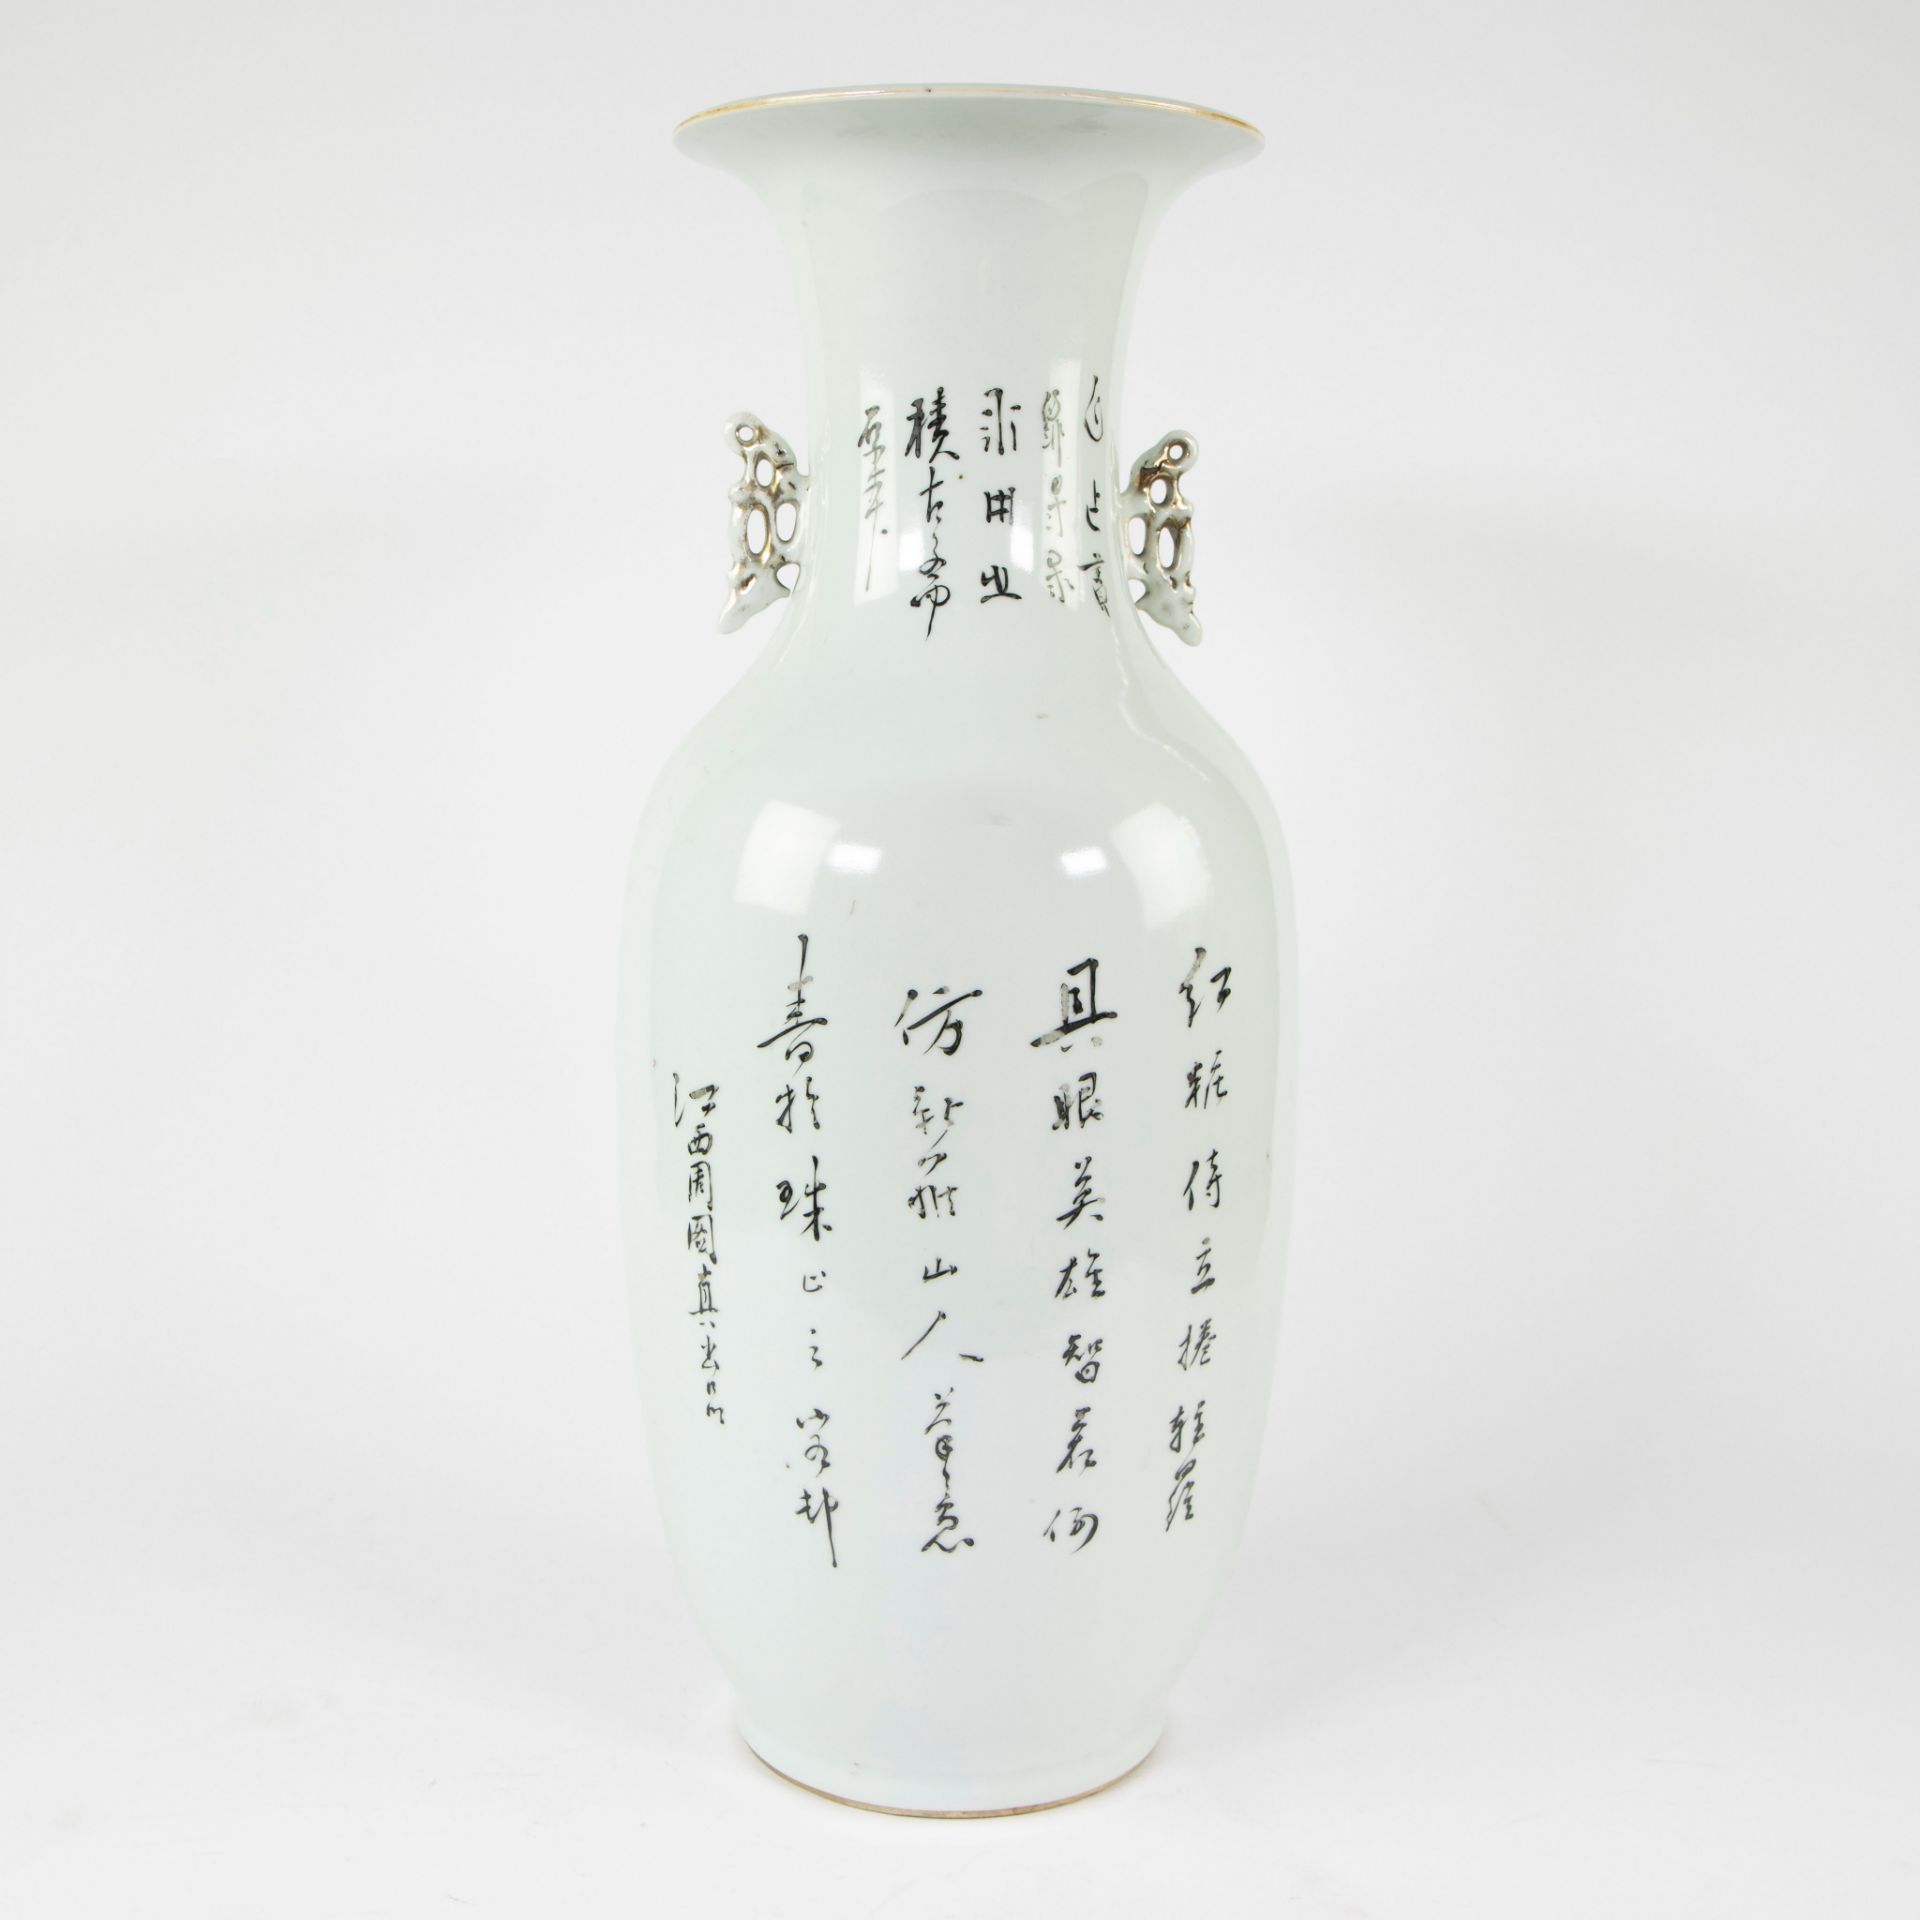 19th century Chinese famille rose vase decorated with figures and Chinese texts - Image 5 of 11